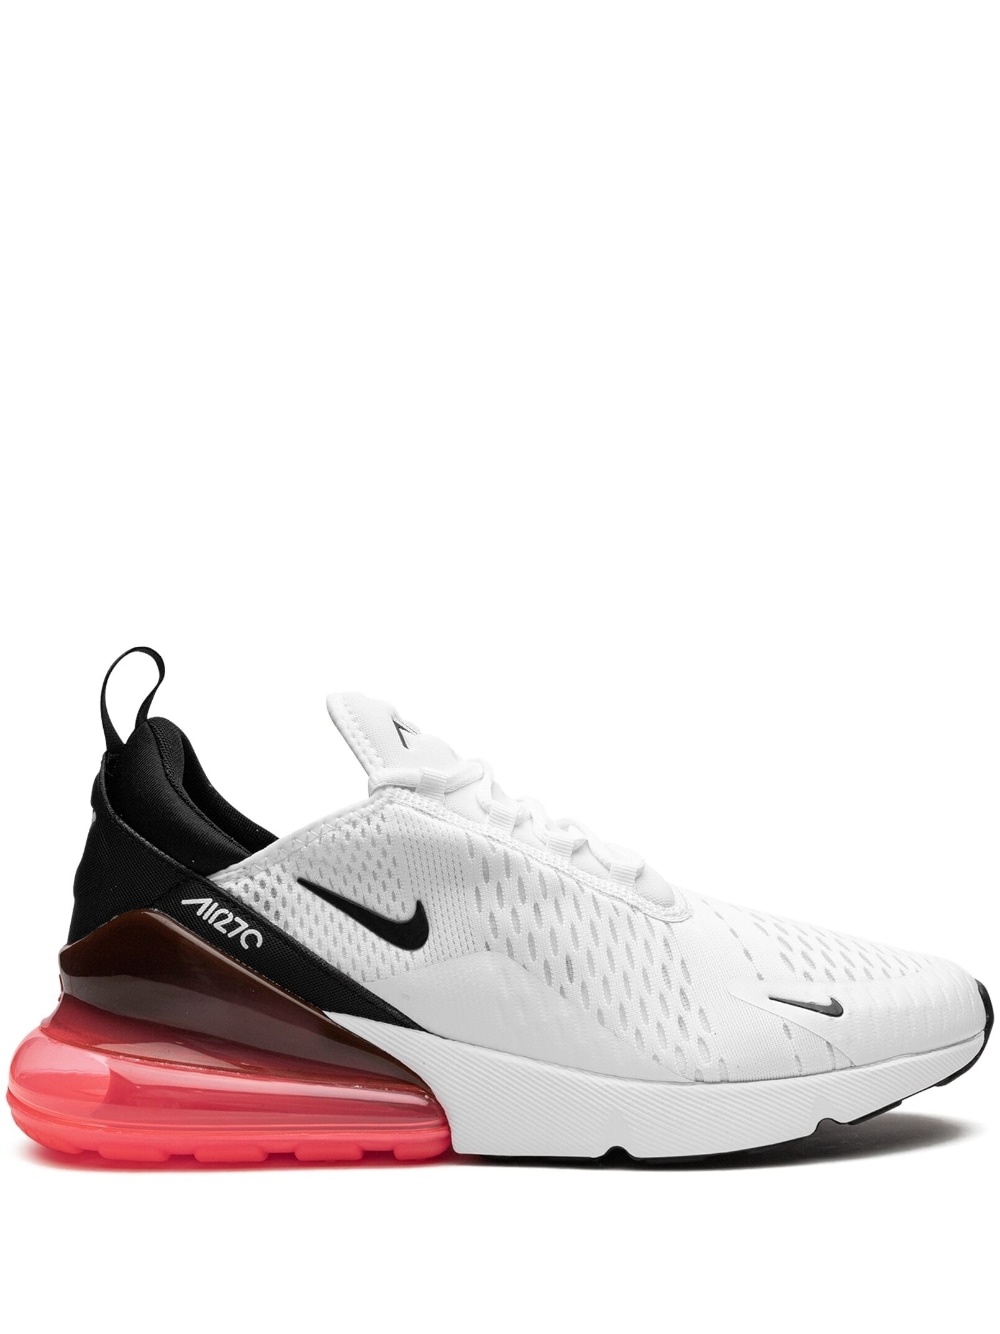 Air Max 270 "White Hot Punch" sneakers - 1